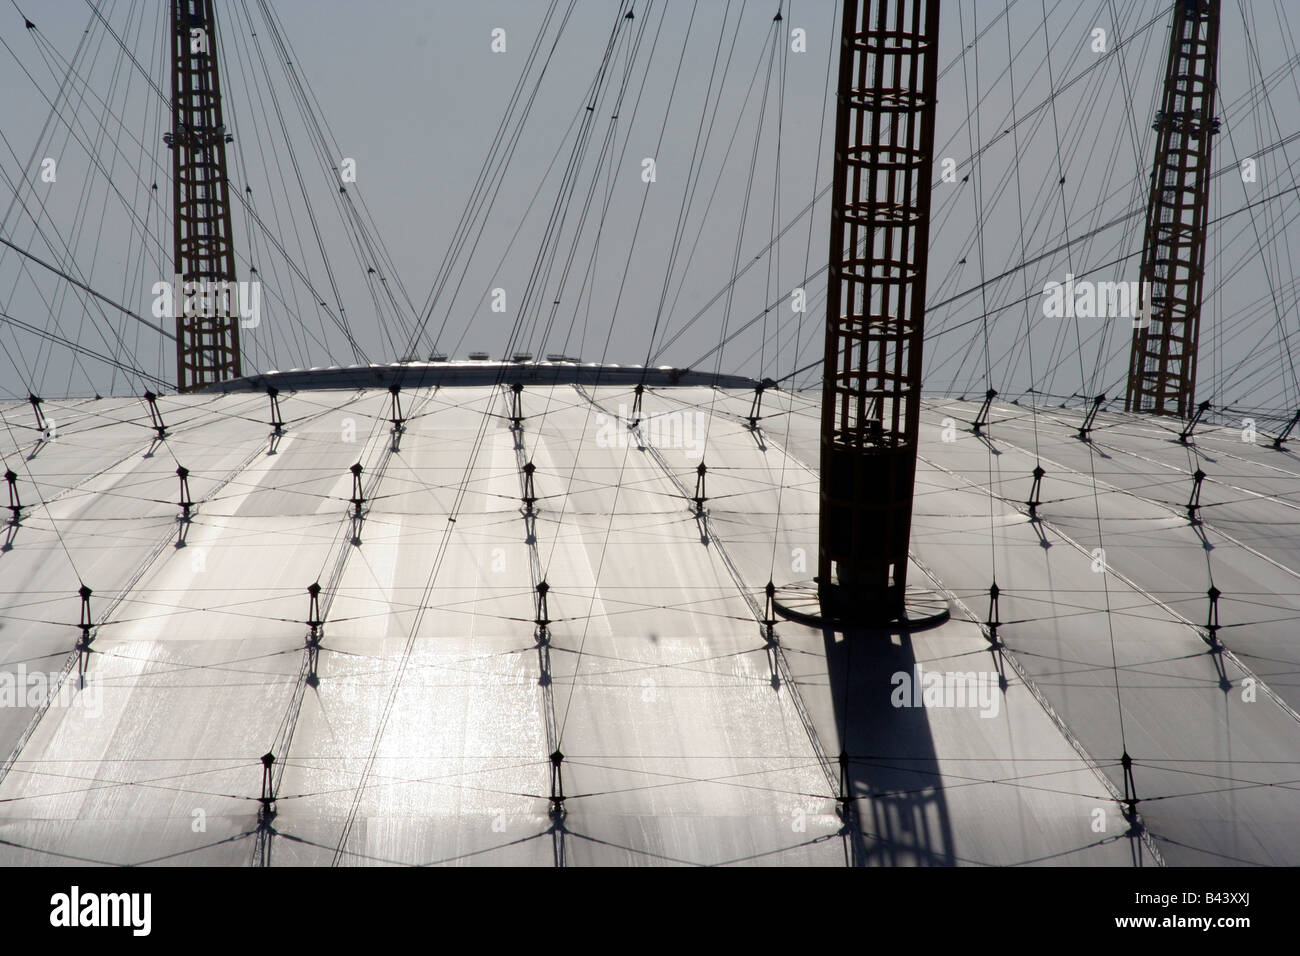 A Graphic view of the Millenium Dome Roof Stock Photo